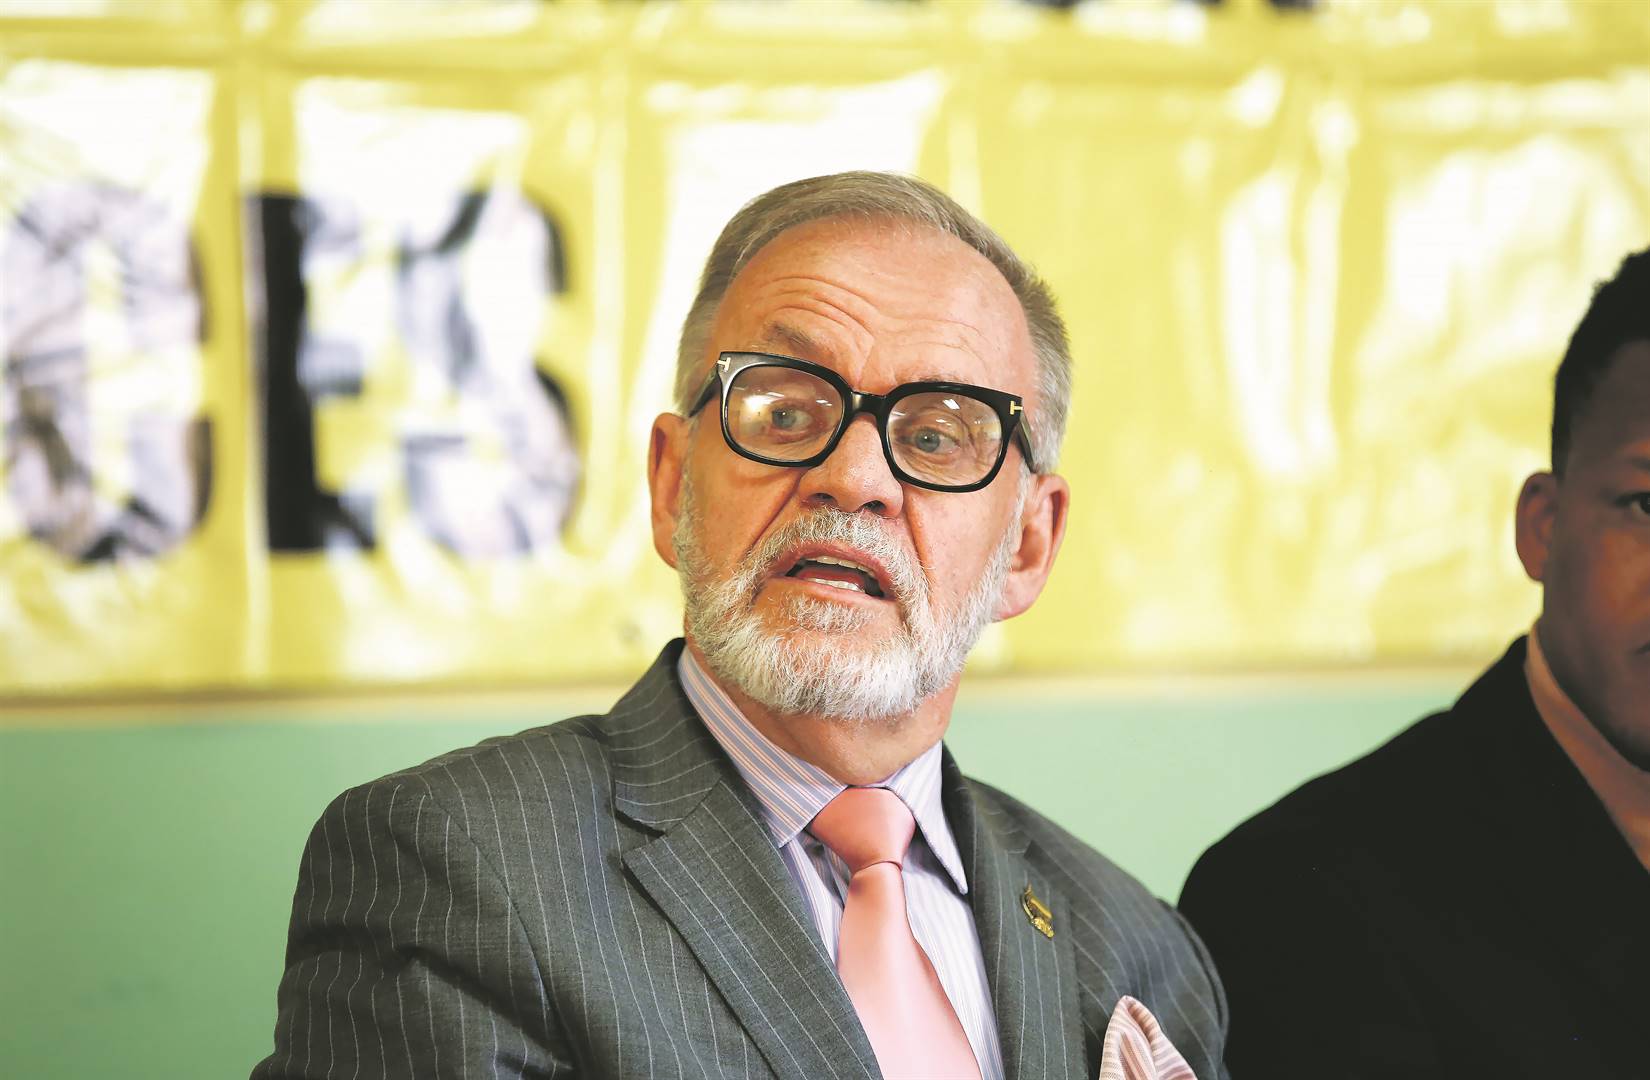 Carl Niehaus said he’ll build a political movement that will work for Mzansi people. Photo by Gallo Images